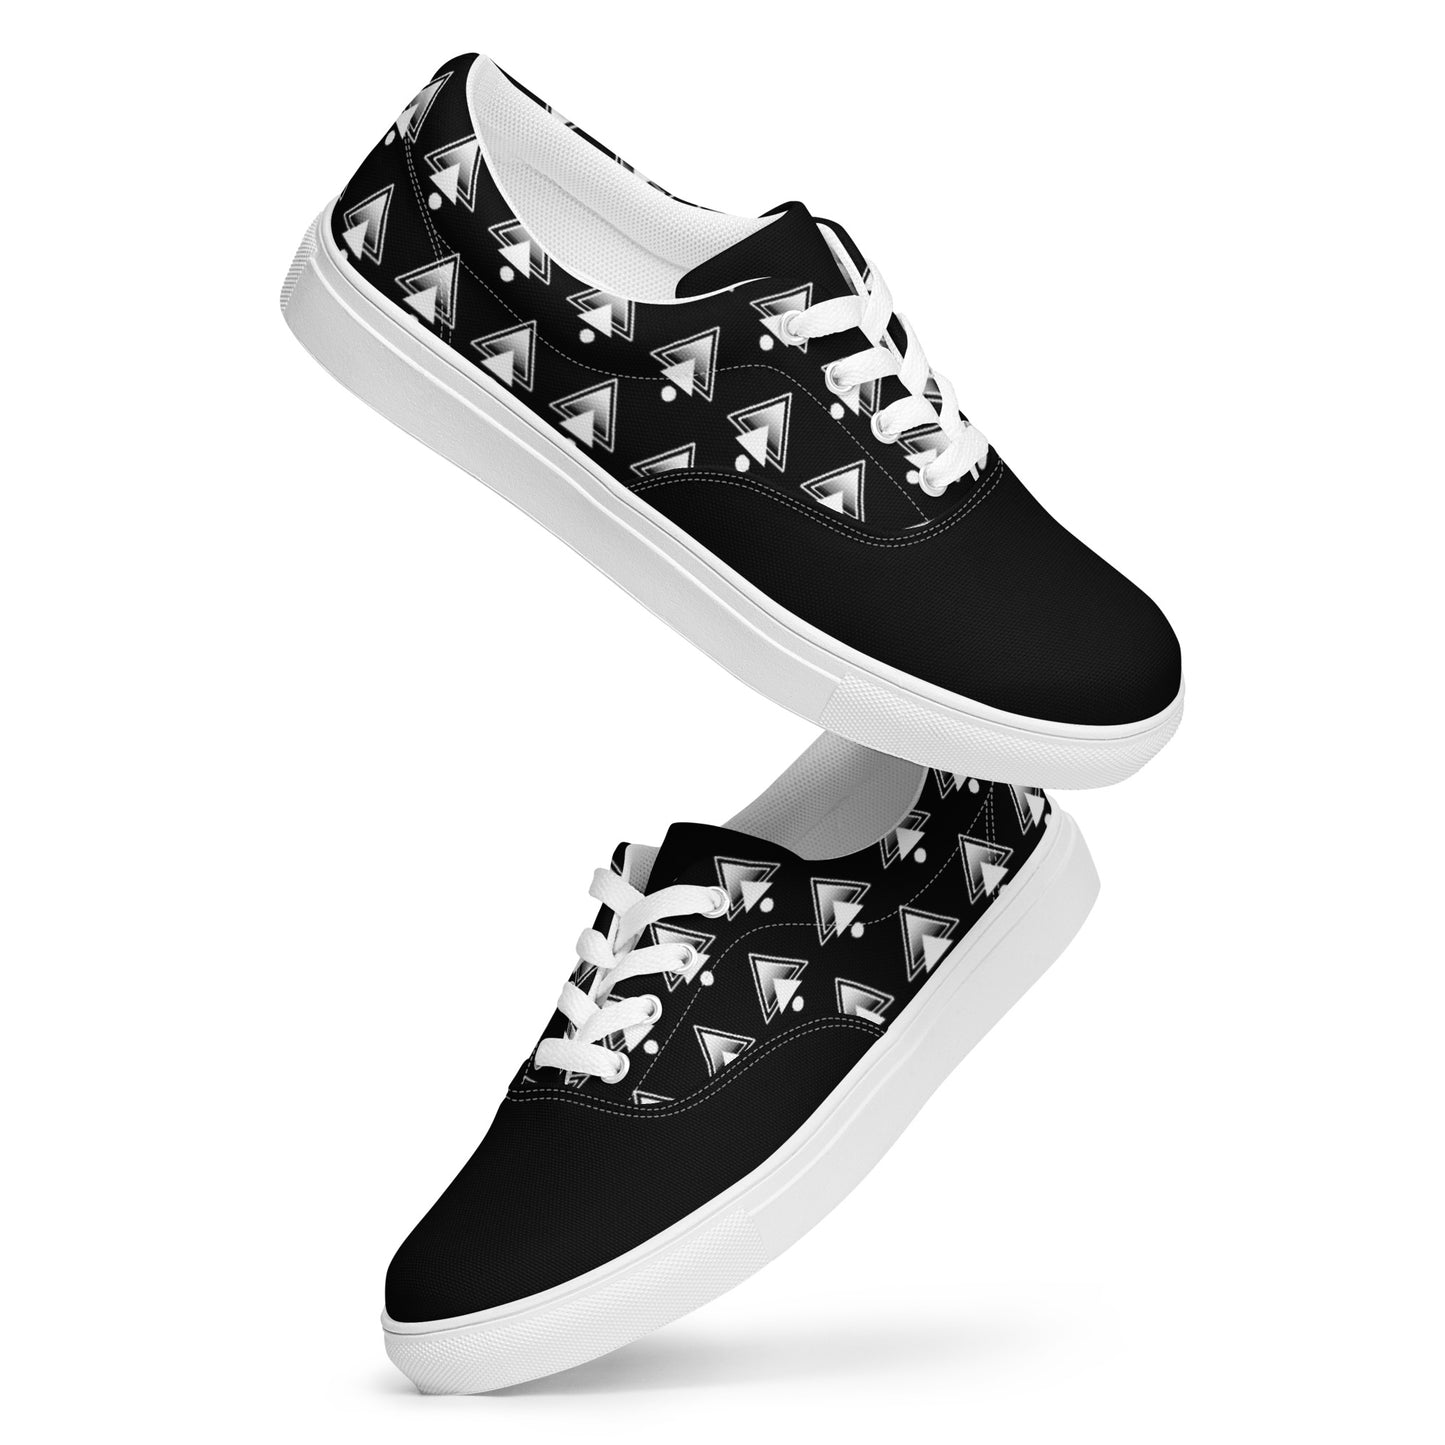 Refraction lace-up canvas shoes